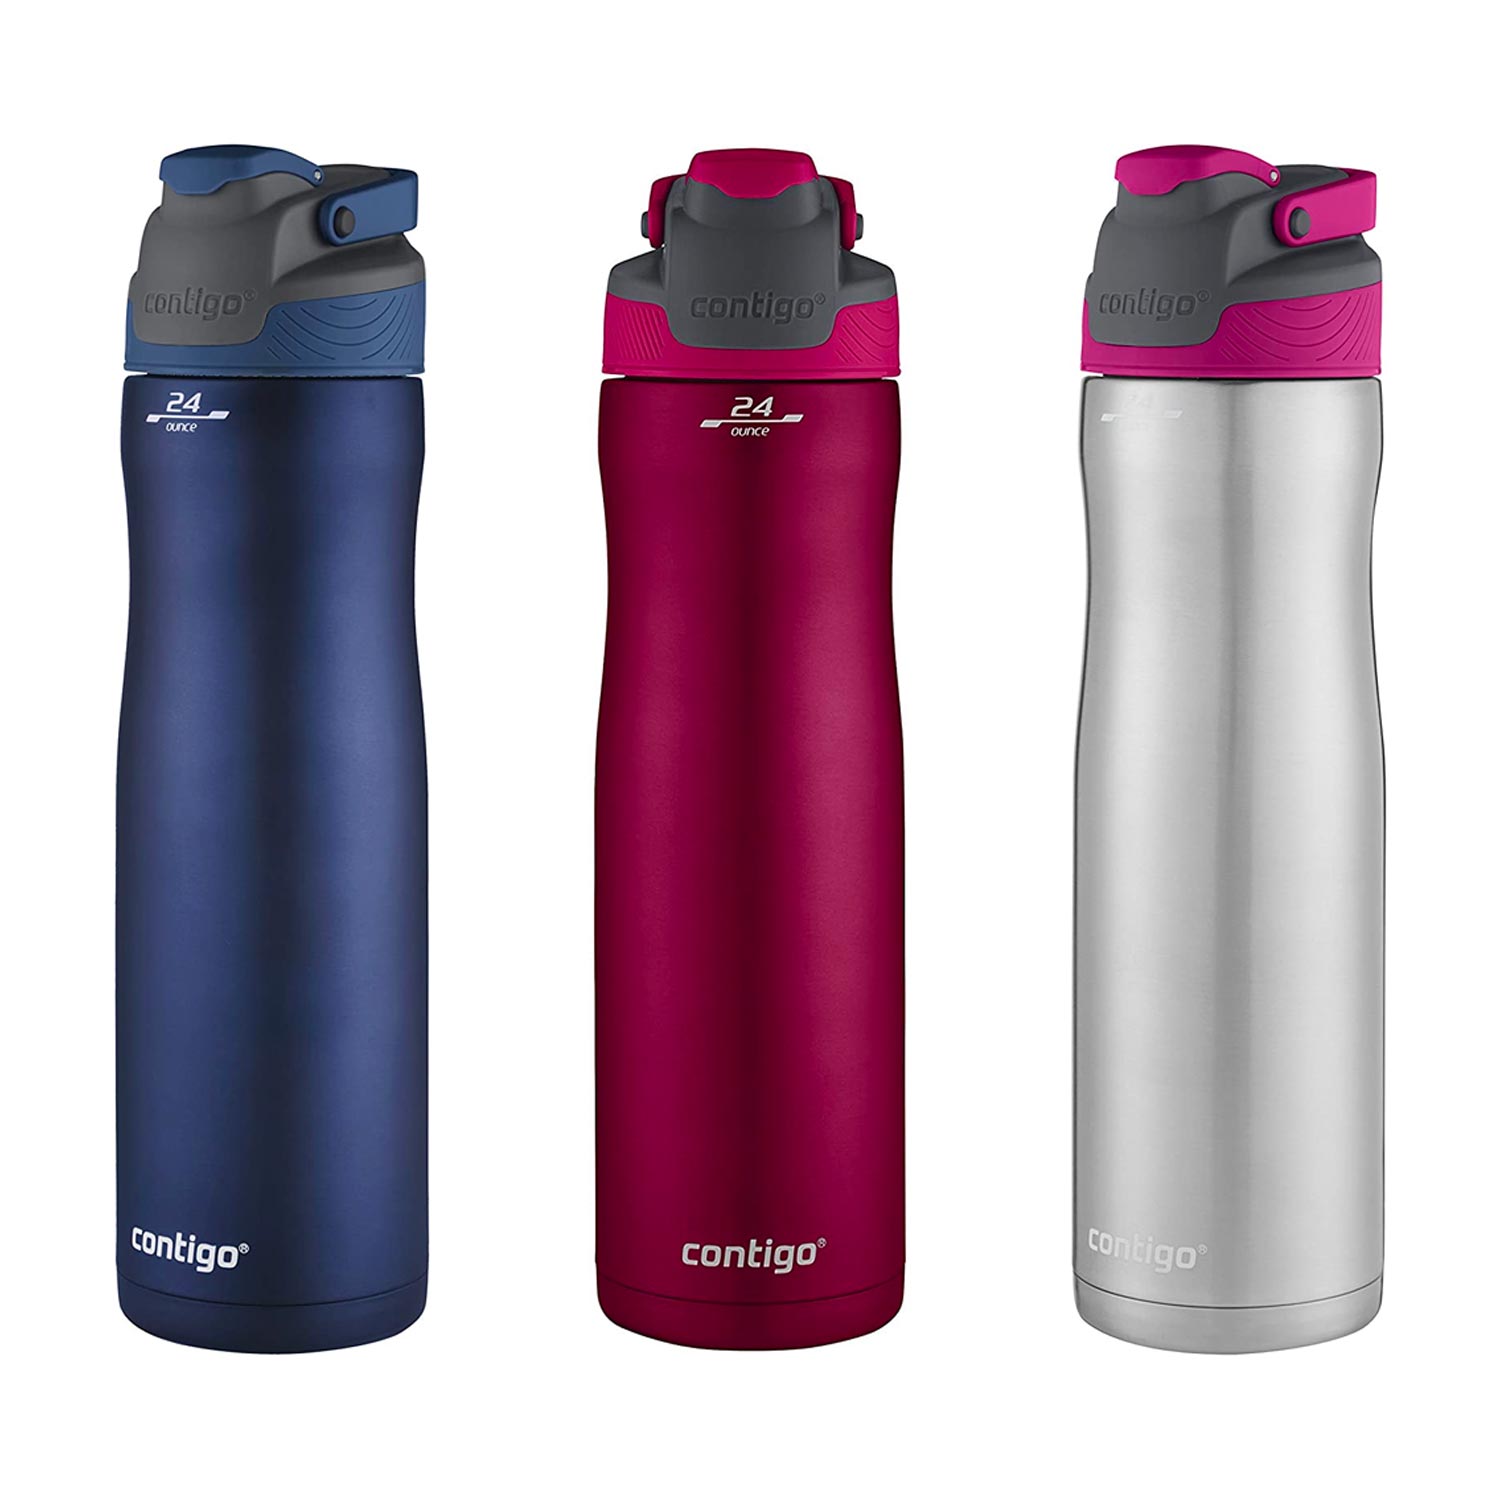 Water bottle in three different colors